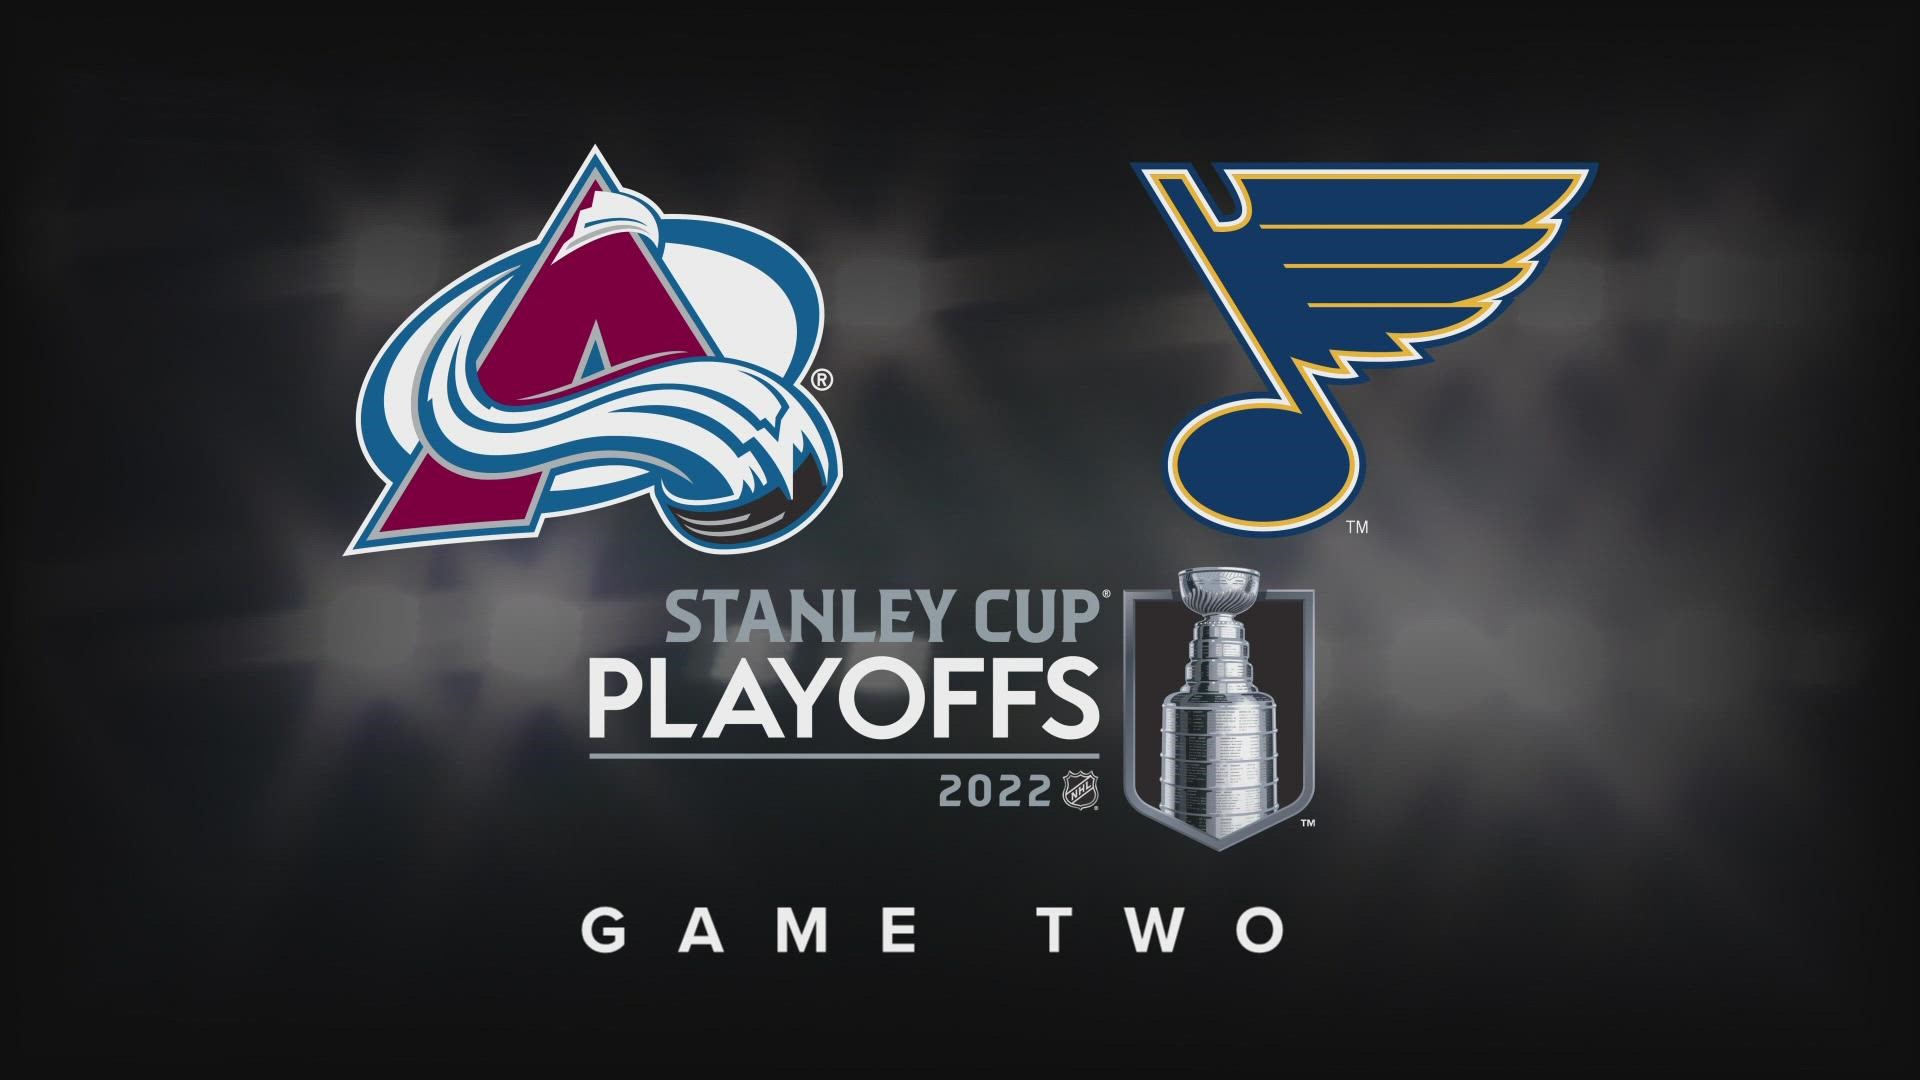 Colorado and St. Louis square off again in their second-round NHL playoff series Thursday night.